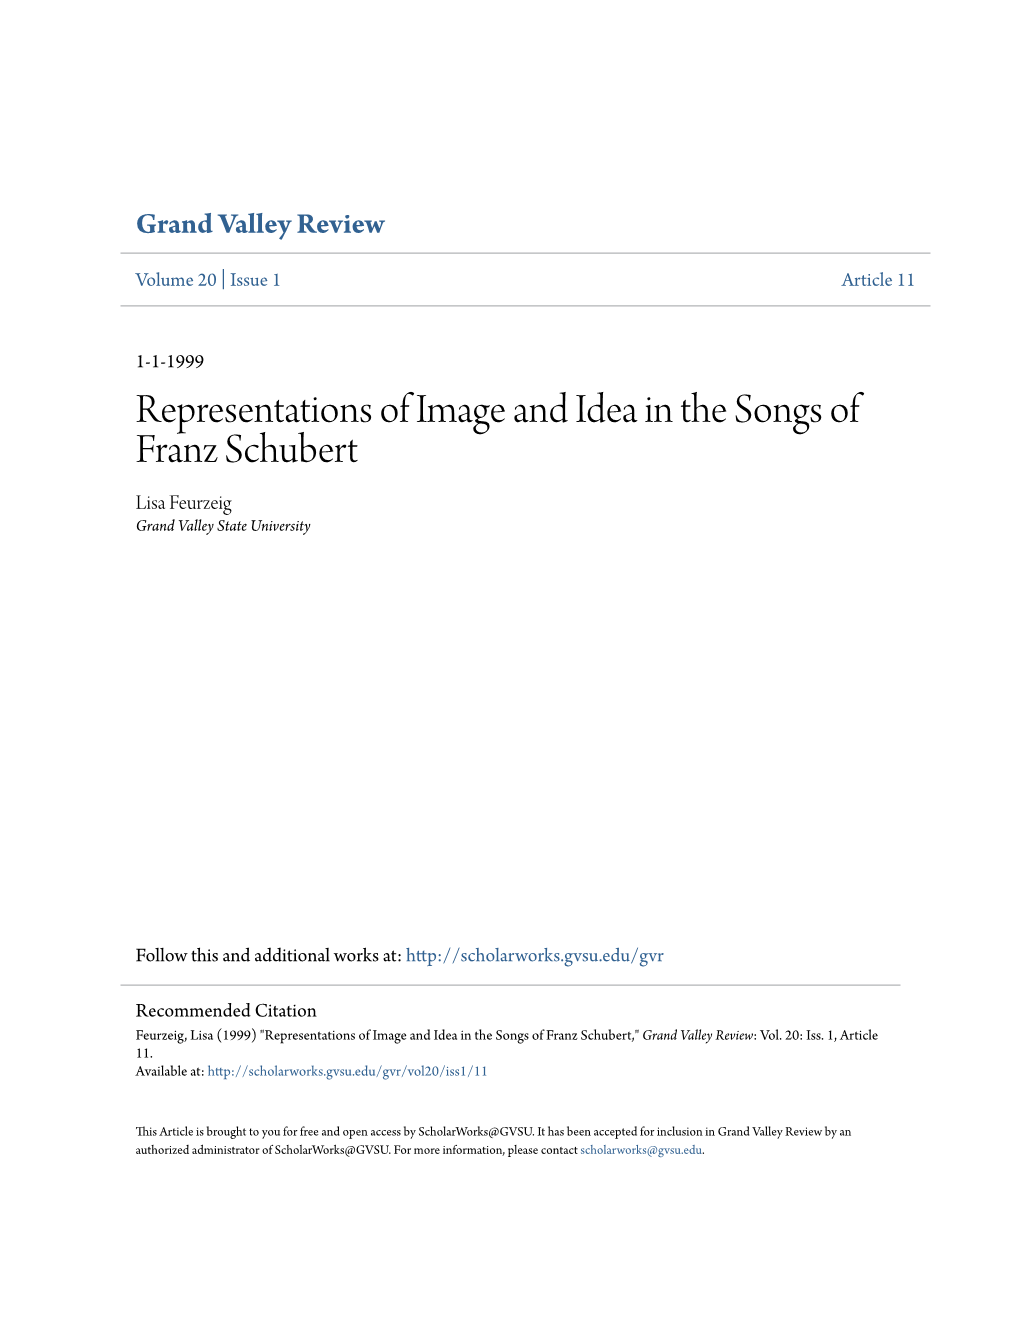 Representations of Image and Idea in the Songs of Franz Schubert Lisa Feurzeig Grand Valley State University